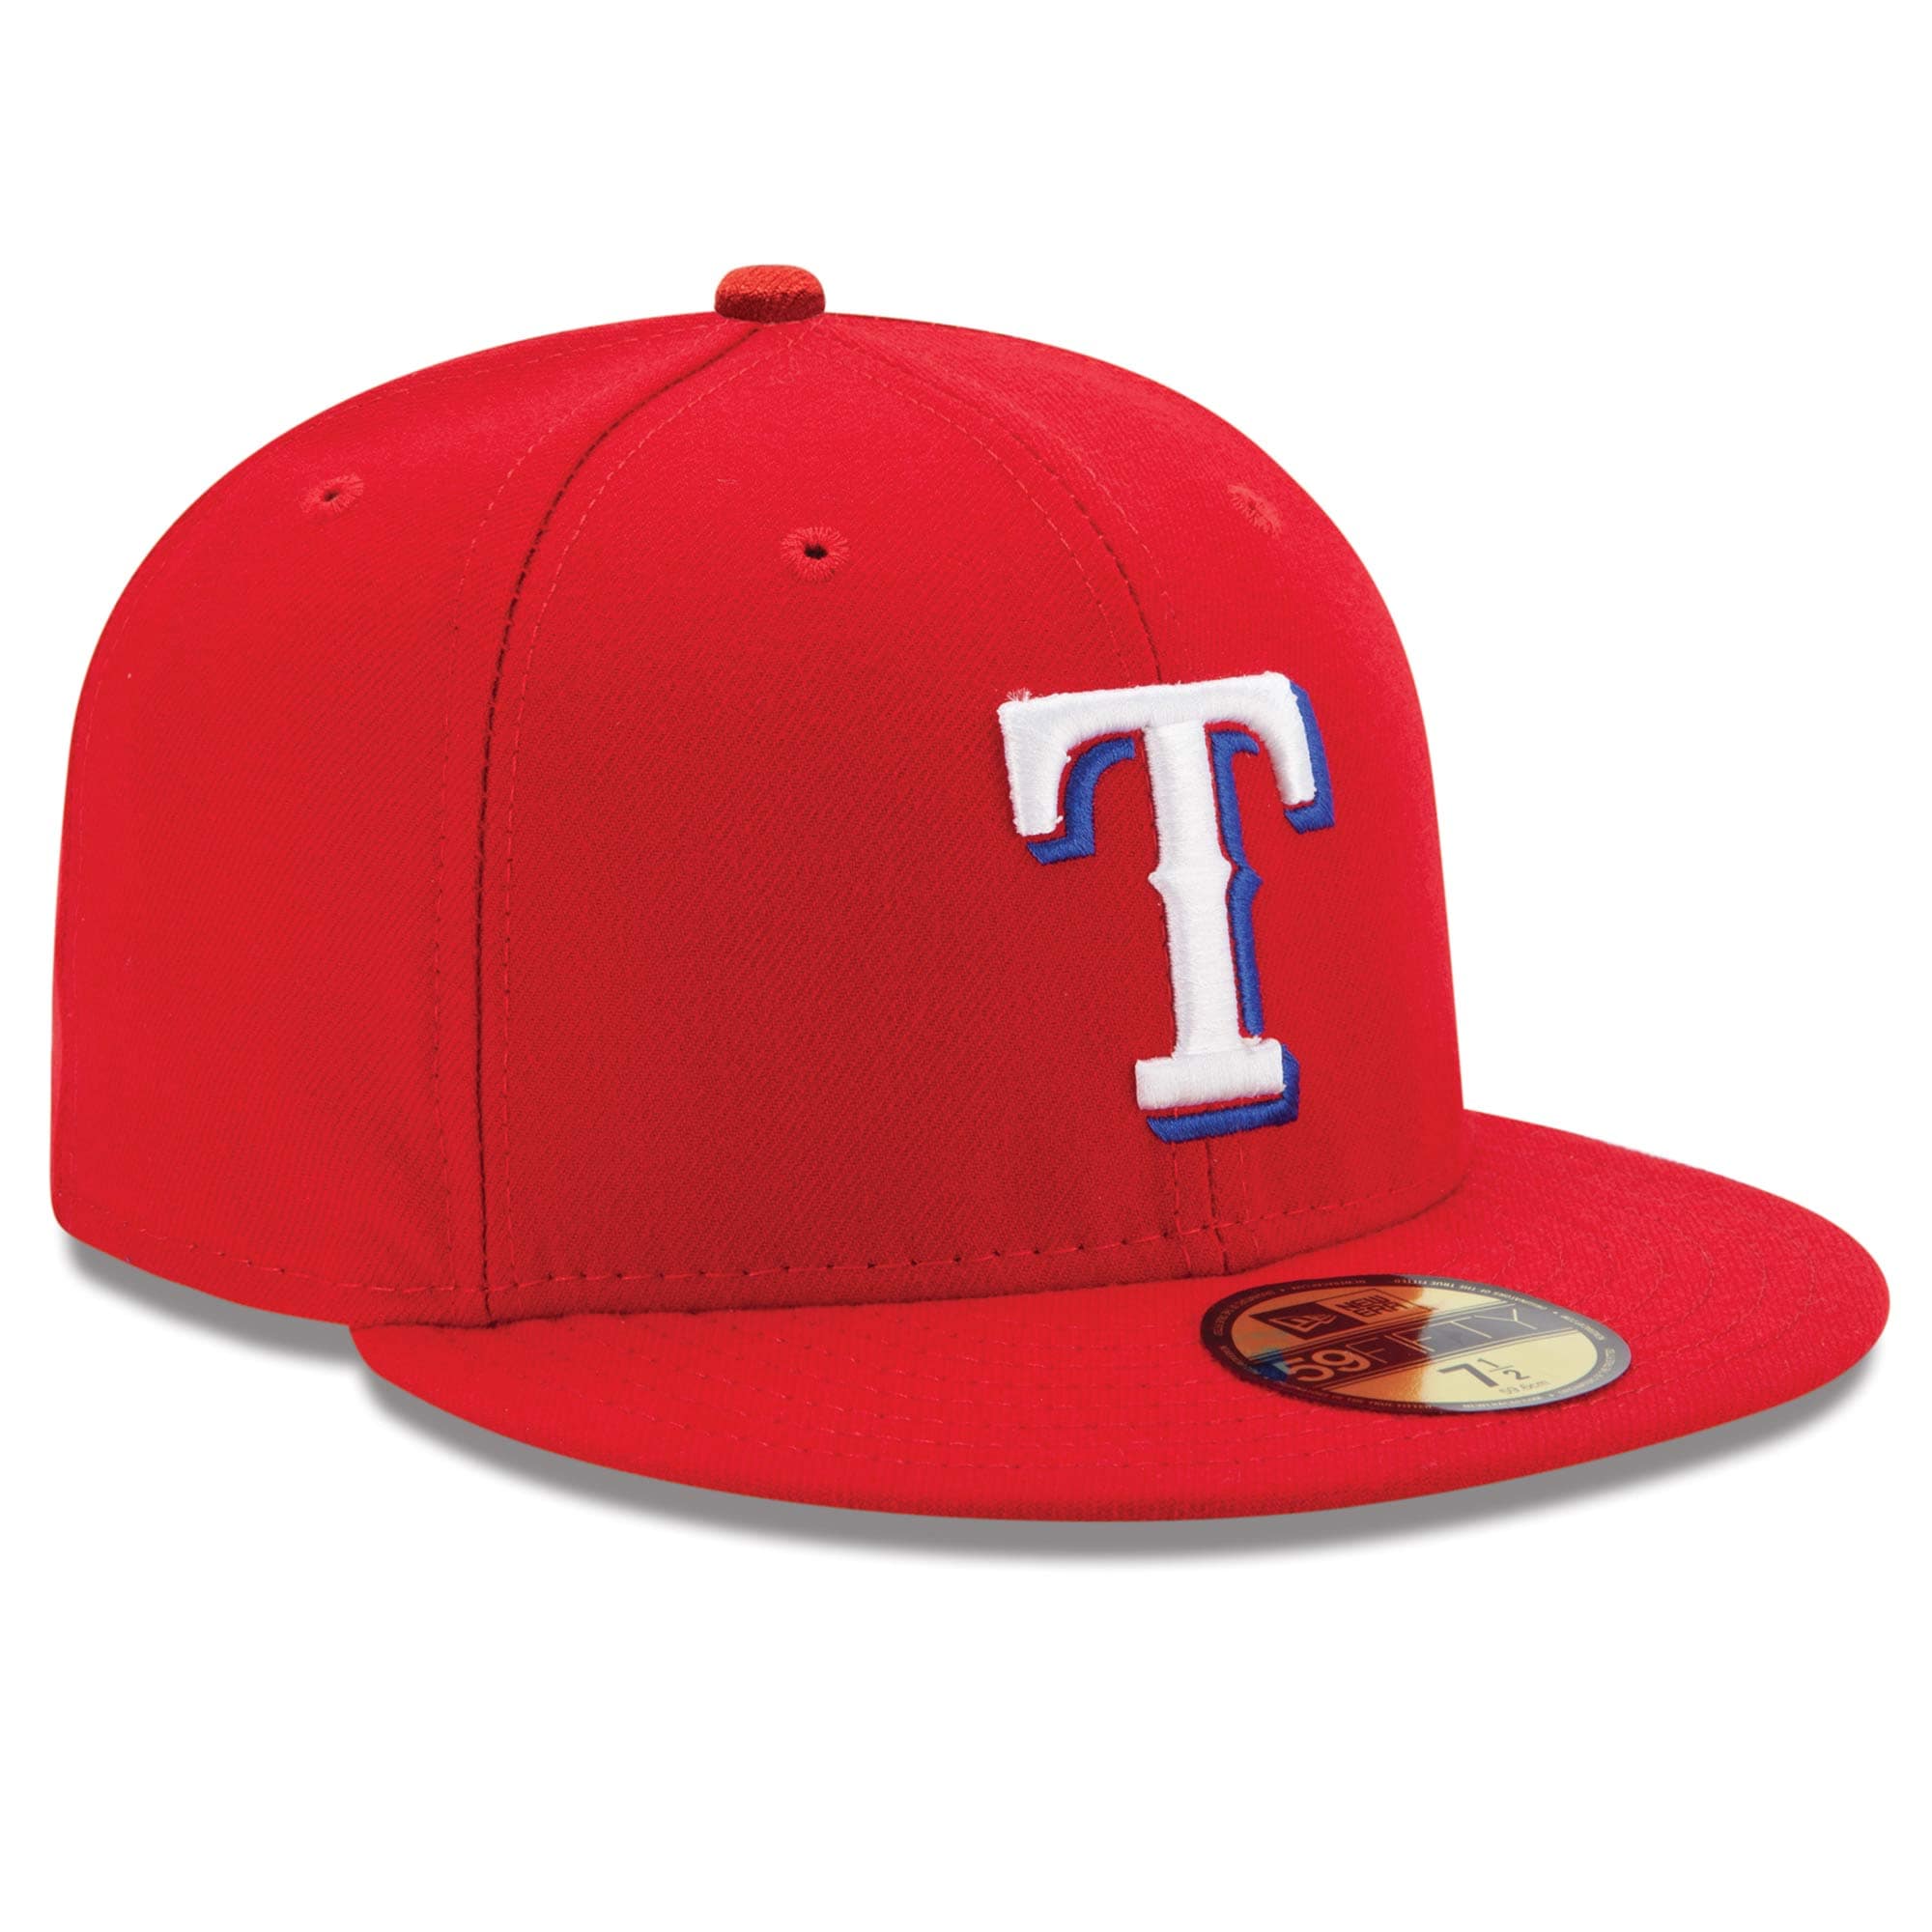 Men's New Era Red Texas Rangers Alternate Authentic Collection On-Field 59FIFTY Fitted Hat - image 3 of 4